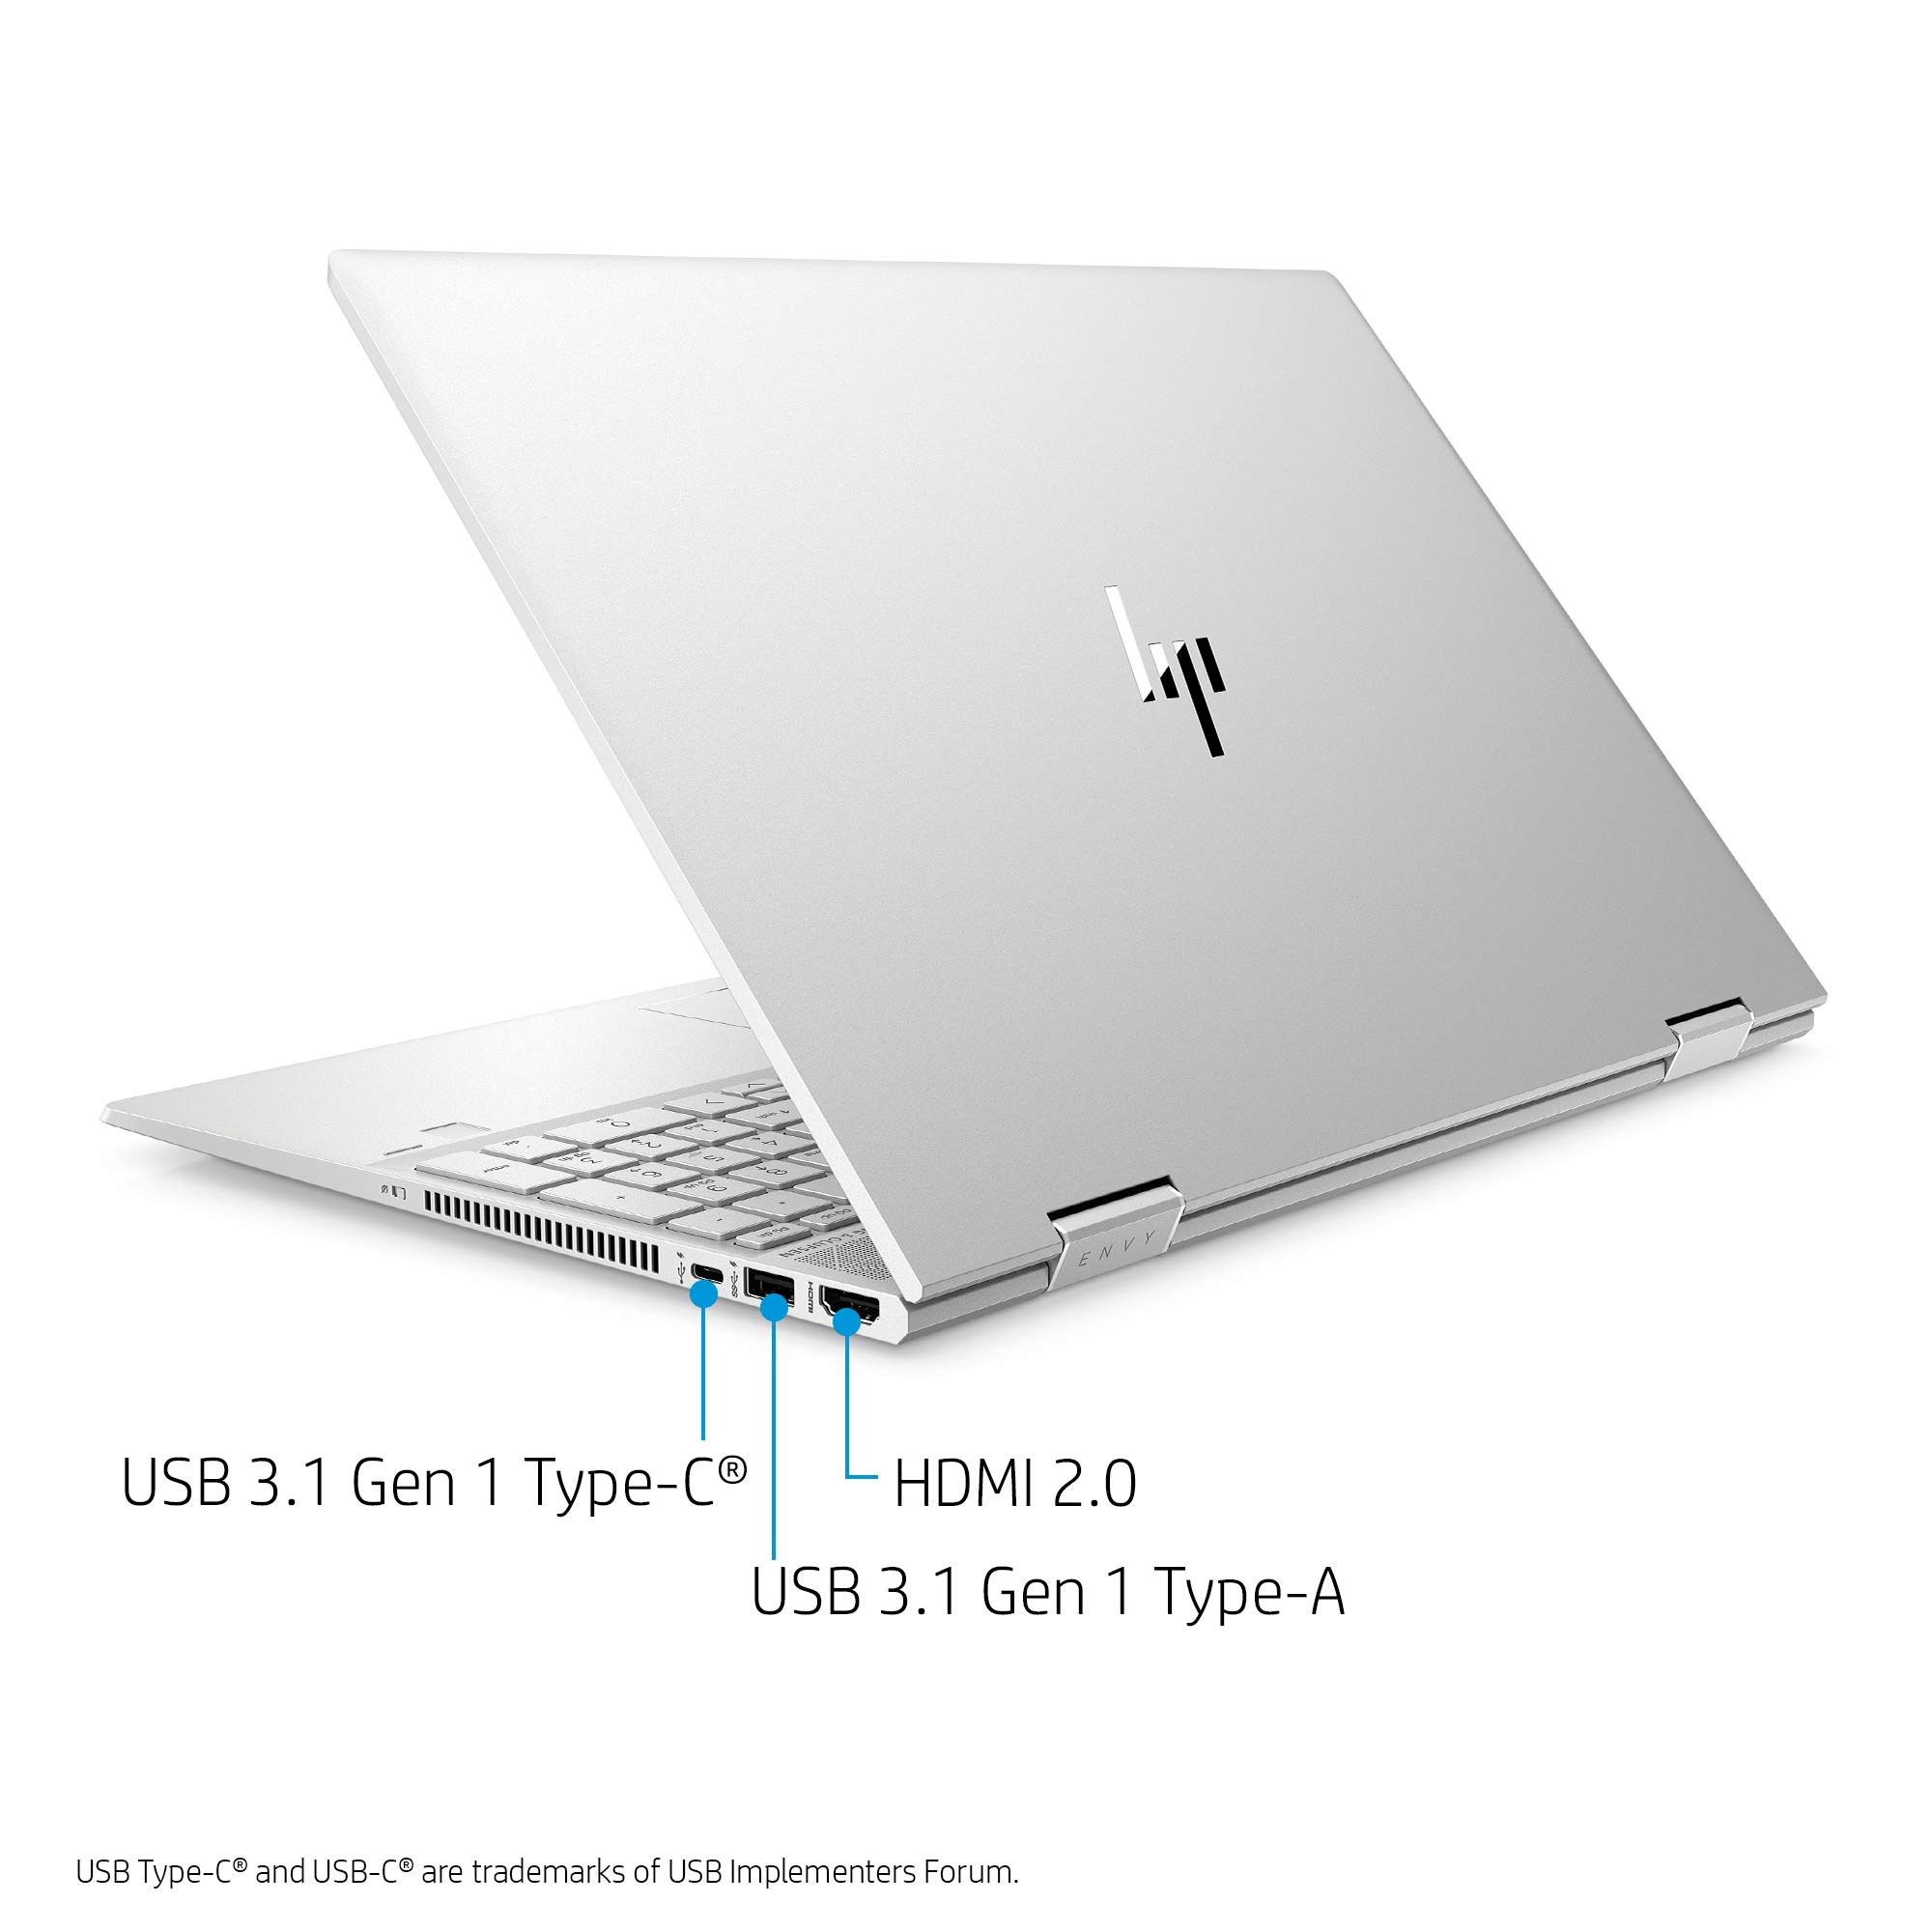 HP Envy x360 2 in 1 Laptop Computer I 15.6